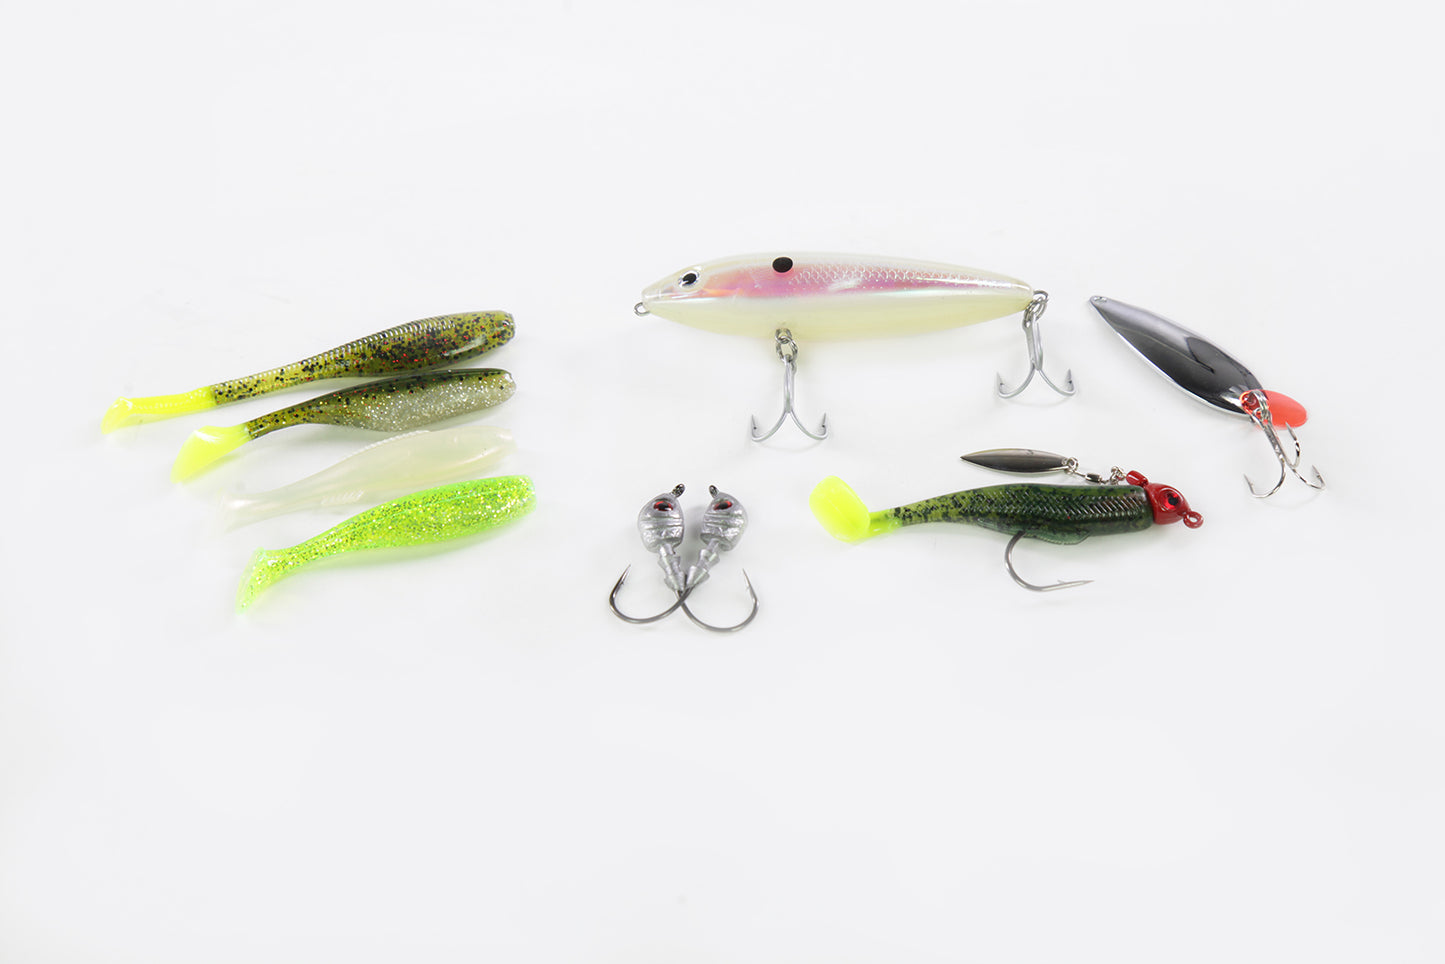 Frog Lures With Propeller Large Noise, Soft Fishing Lure Kit with Tackle  Box for Bass Pike and Speckled Trout 